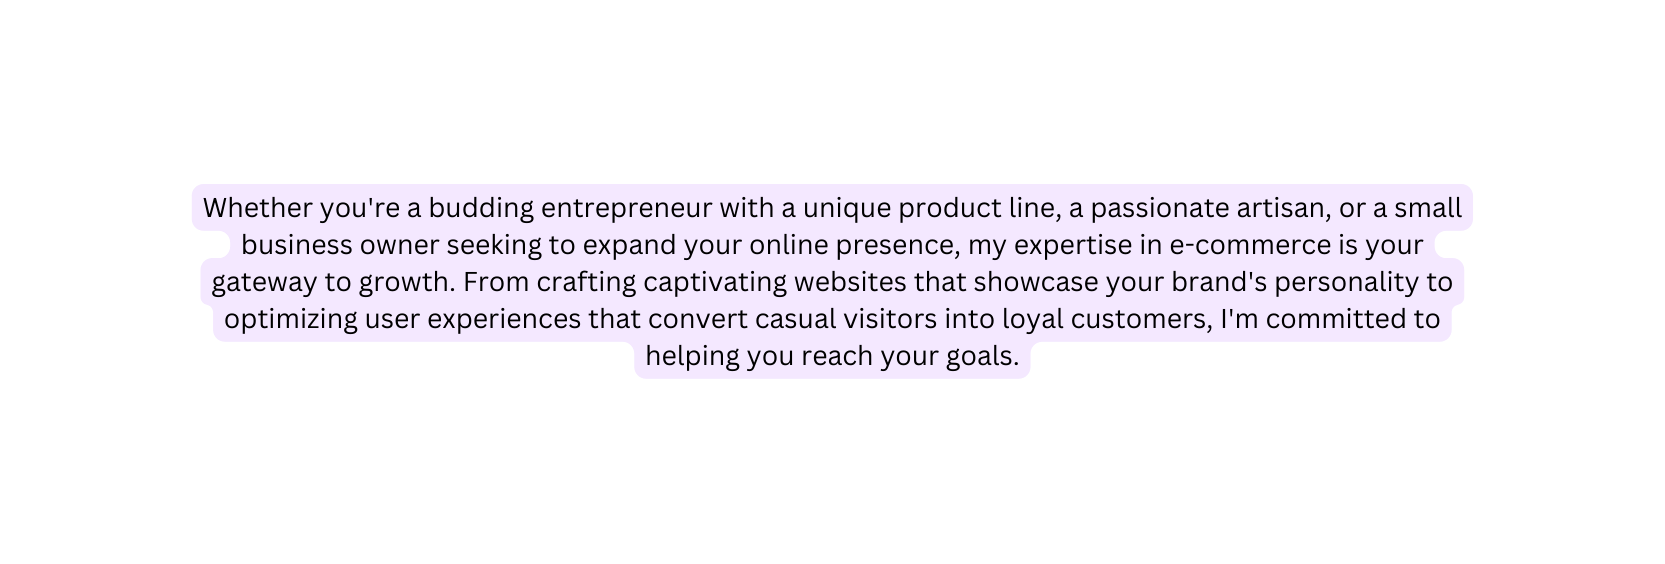 Whether you re a budding entrepreneur with a unique product line a passionate artisan or a small business owner seeking to expand your online presence my expertise in e commerce is your gateway to growth From crafting captivating websites that showcase your brand s personality to optimizing user experiences that convert casual visitors into loyal customers I m committed to helping you reach your goals